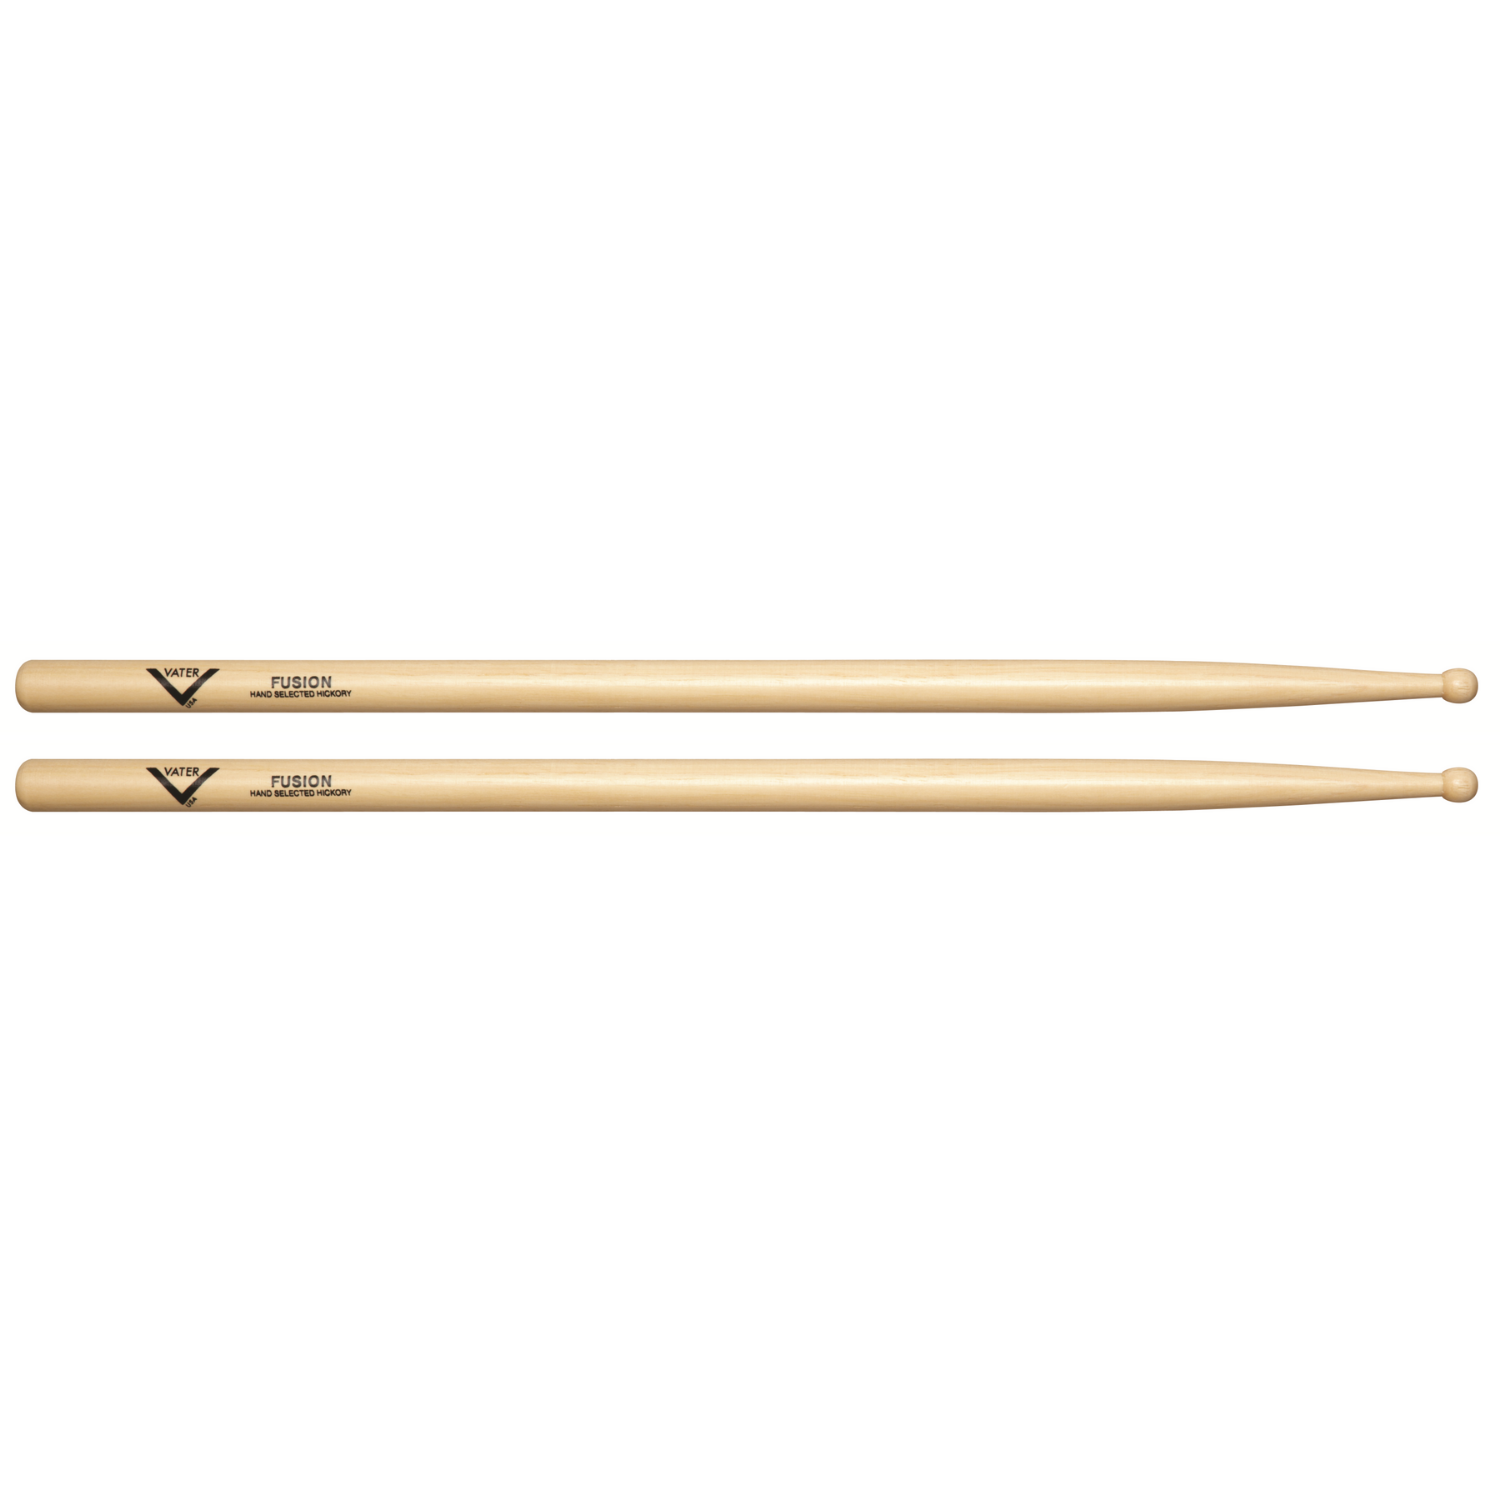 Vater VHFW American Hickory Fusion Wood